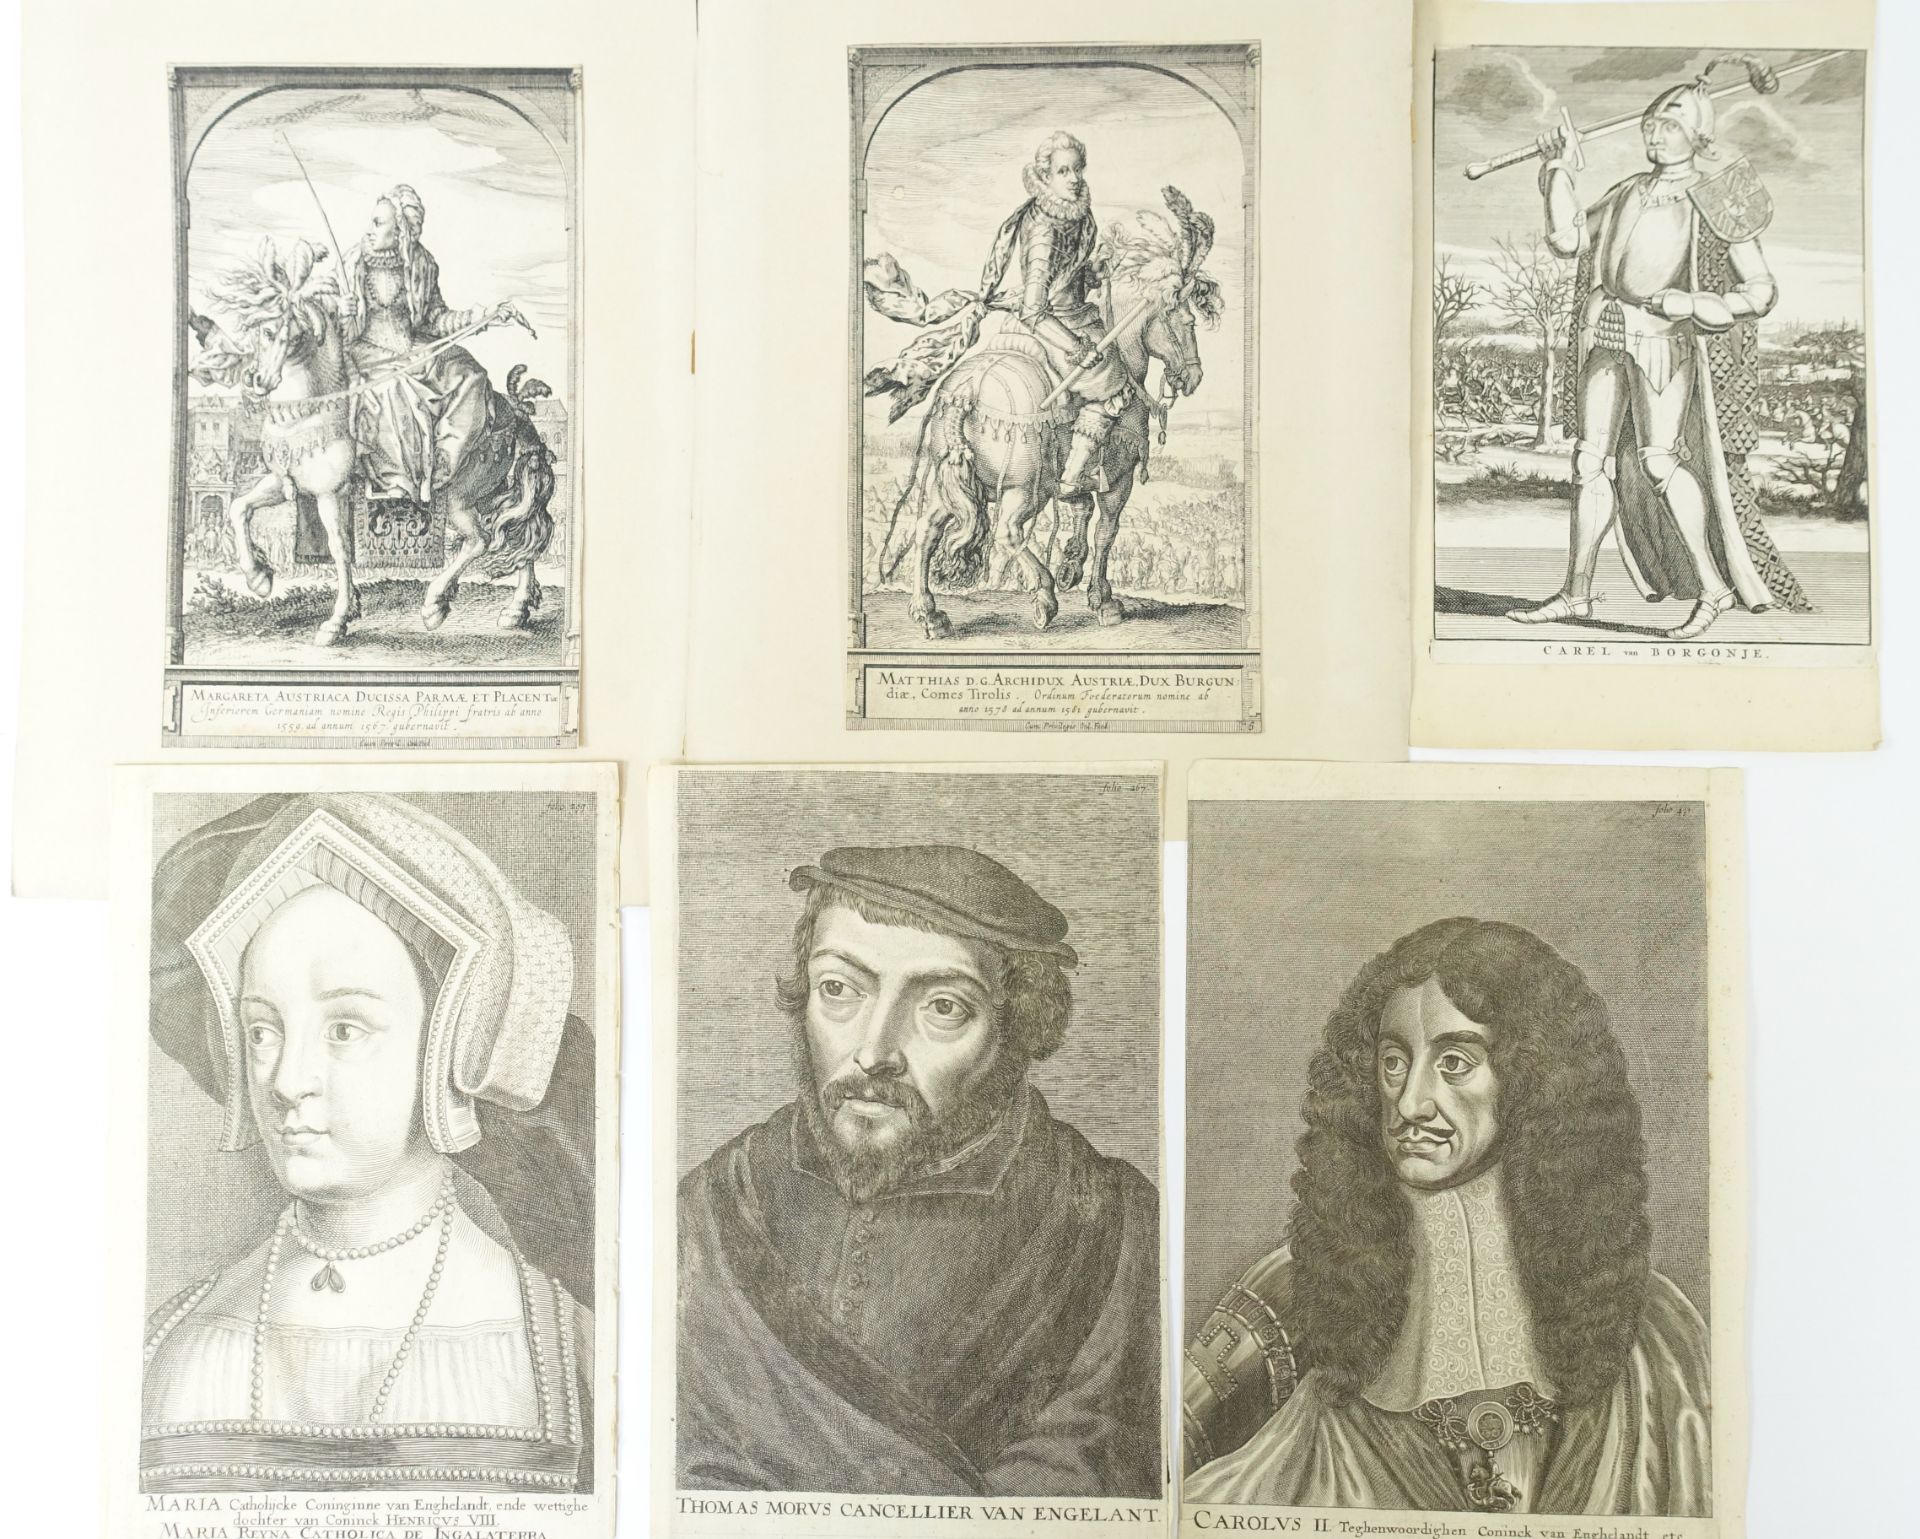 PORTRAITS -- COLLECTION of 91 engraved portraits of European, but primarily Dutch, rulers